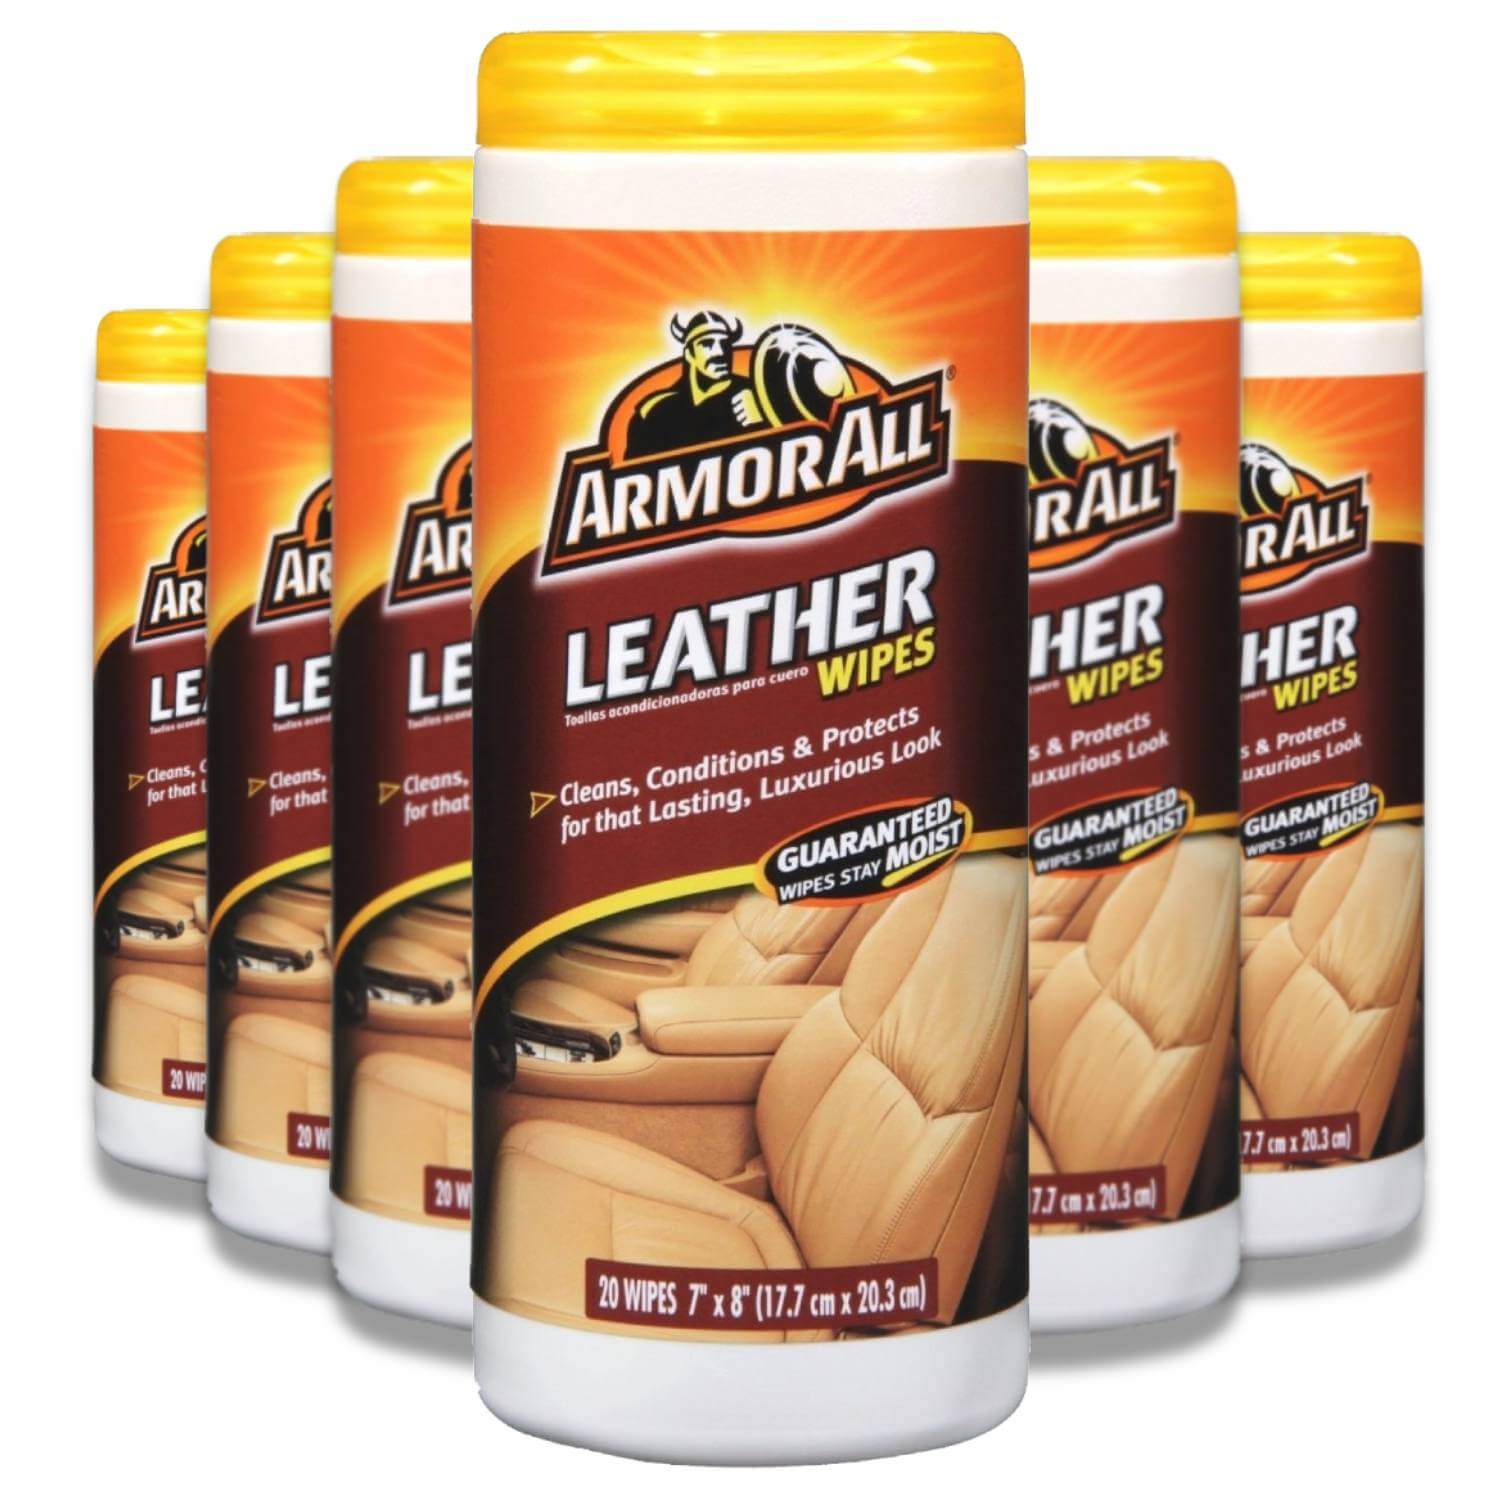 6 PACK Armor All Leather Care Wipes Automotive Protector - 30 count each